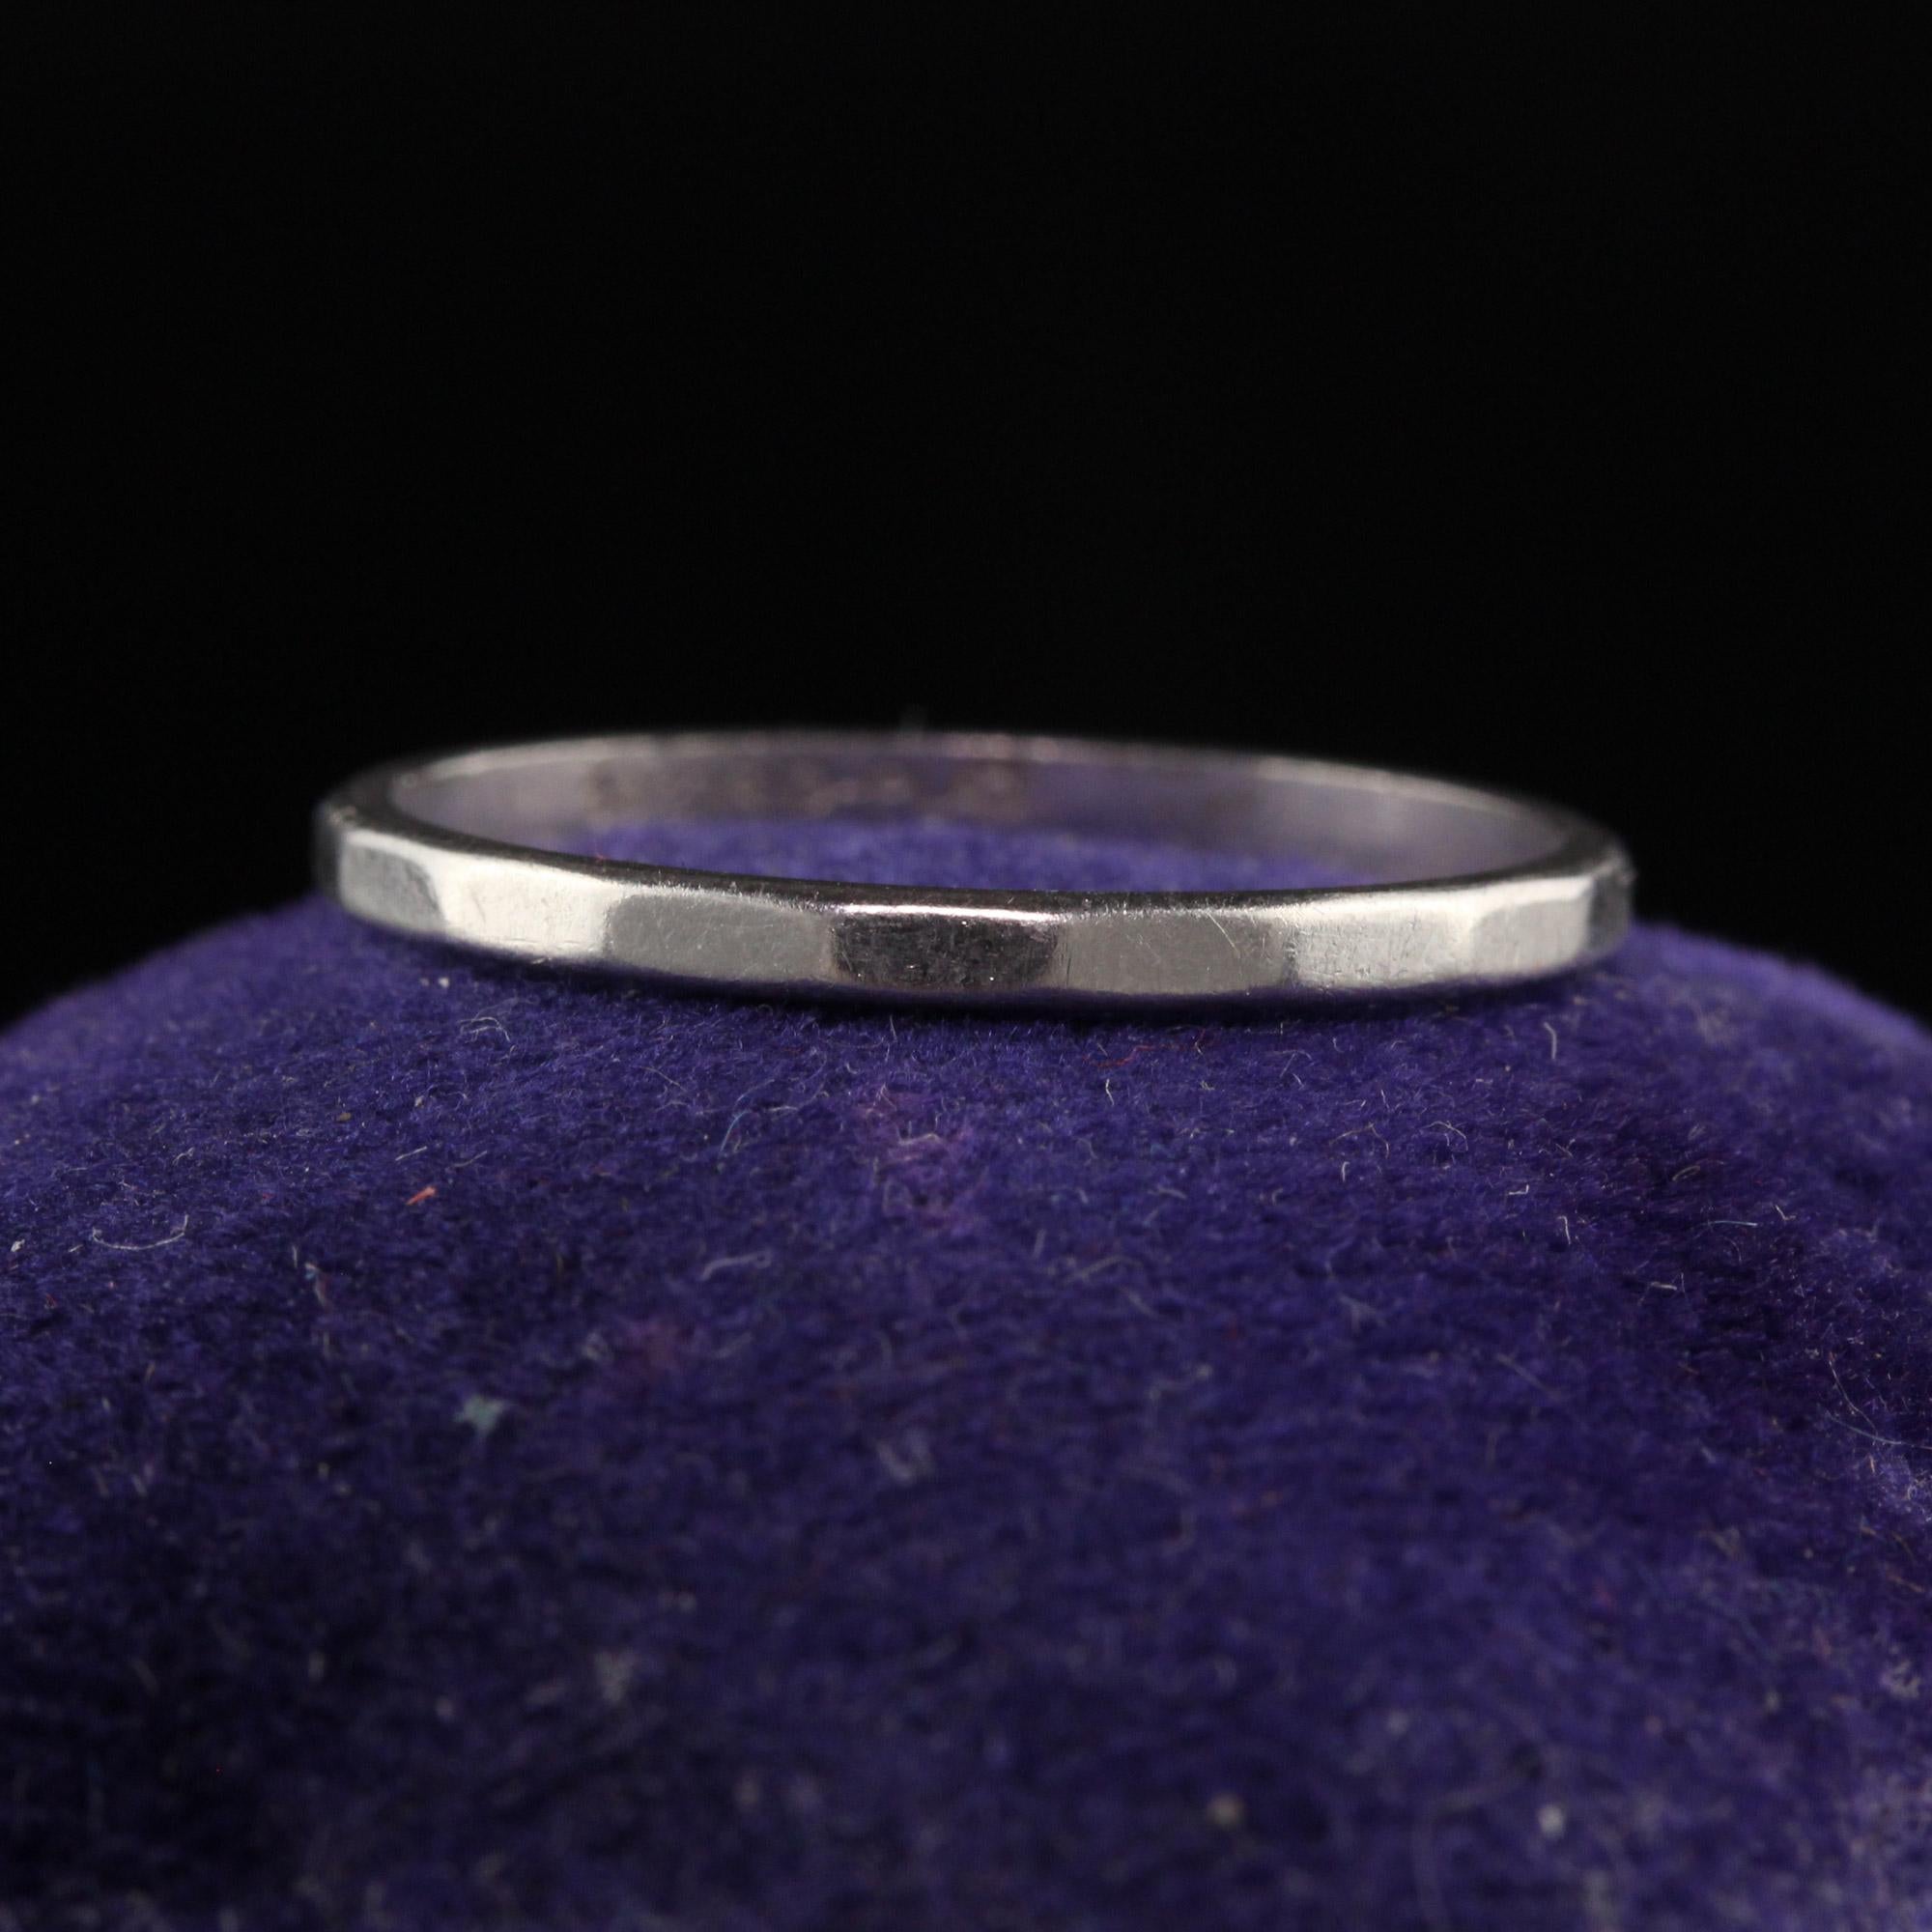 Beautiful Antique Art Deco Platinum Geometric Pattern Wedding Band - Size 6. This gorgeous wedding band is crafted in platinum. This band has geometric pattern on top of the band and is subtle.

Item #R1300

Metal: Platinum

Weight: 1.7 Grams

Size: